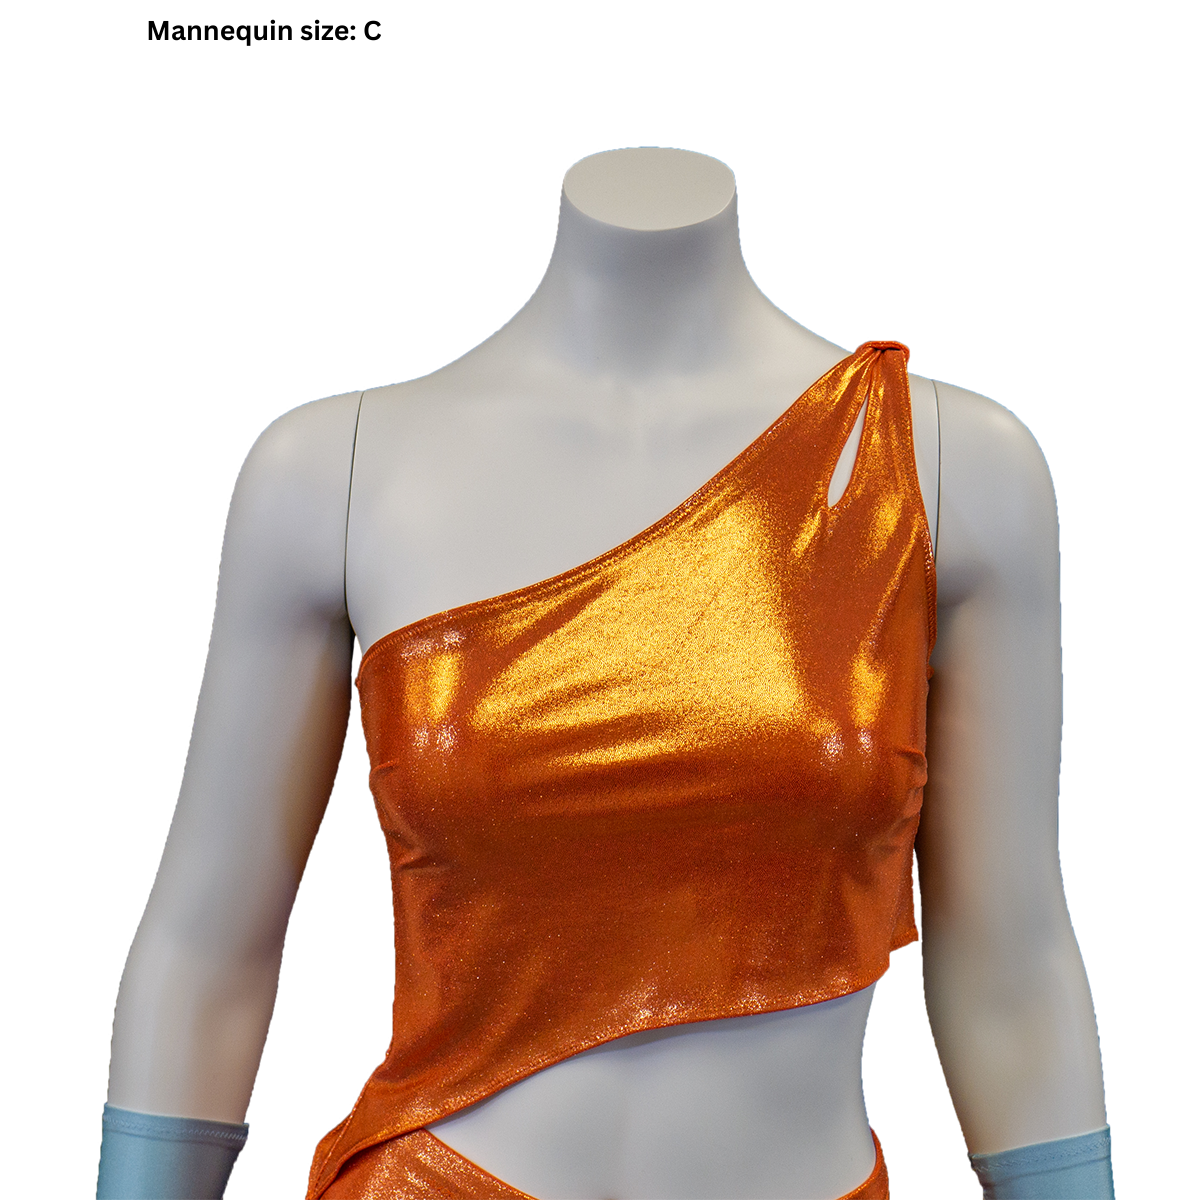 A photo of the front view of our female and plus size female mannequins in the completed Winx Club's Stella's outfit (sizes C) focusing on the top showing the shoulder slit.